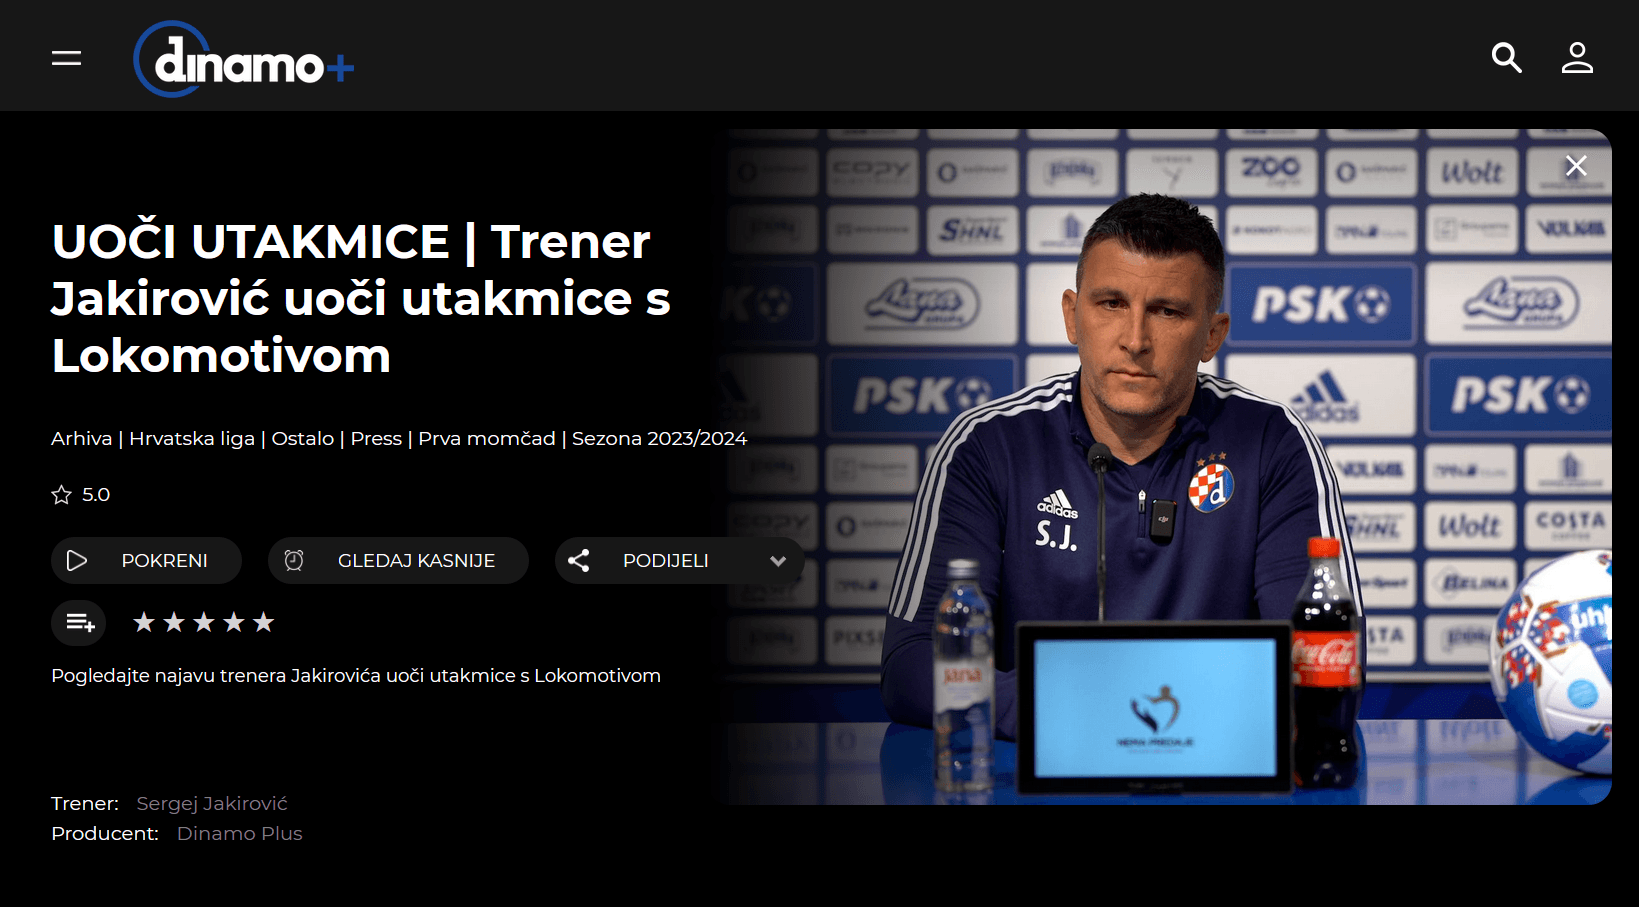 Example of the user interface of the Dinamo+ application